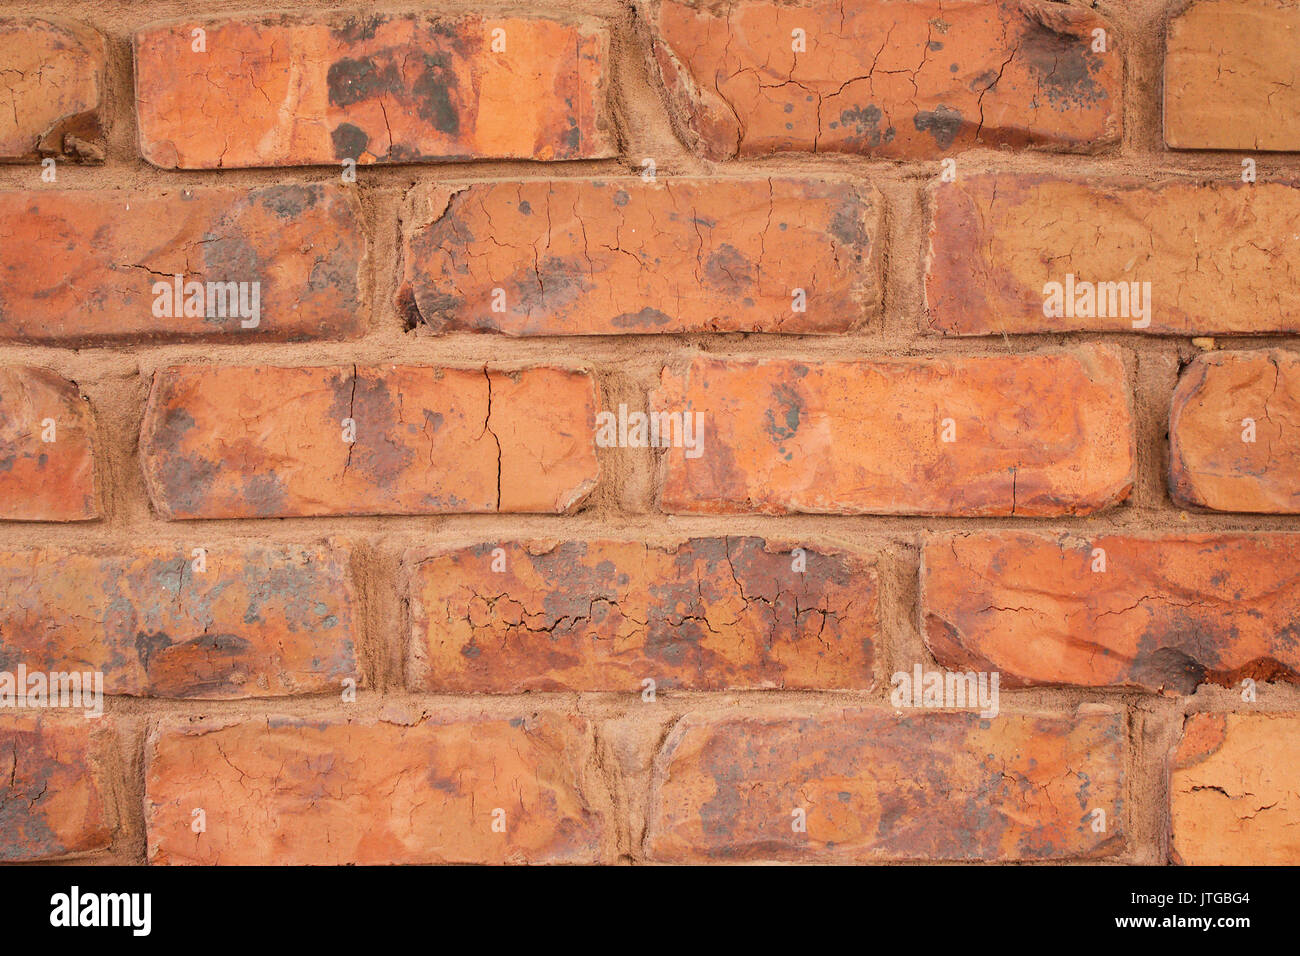 A closeup of irregular shaped red bricks layered in a horizontal pattern with orange brown mortar used to bind them together to construct a brick wall. Stock Photo